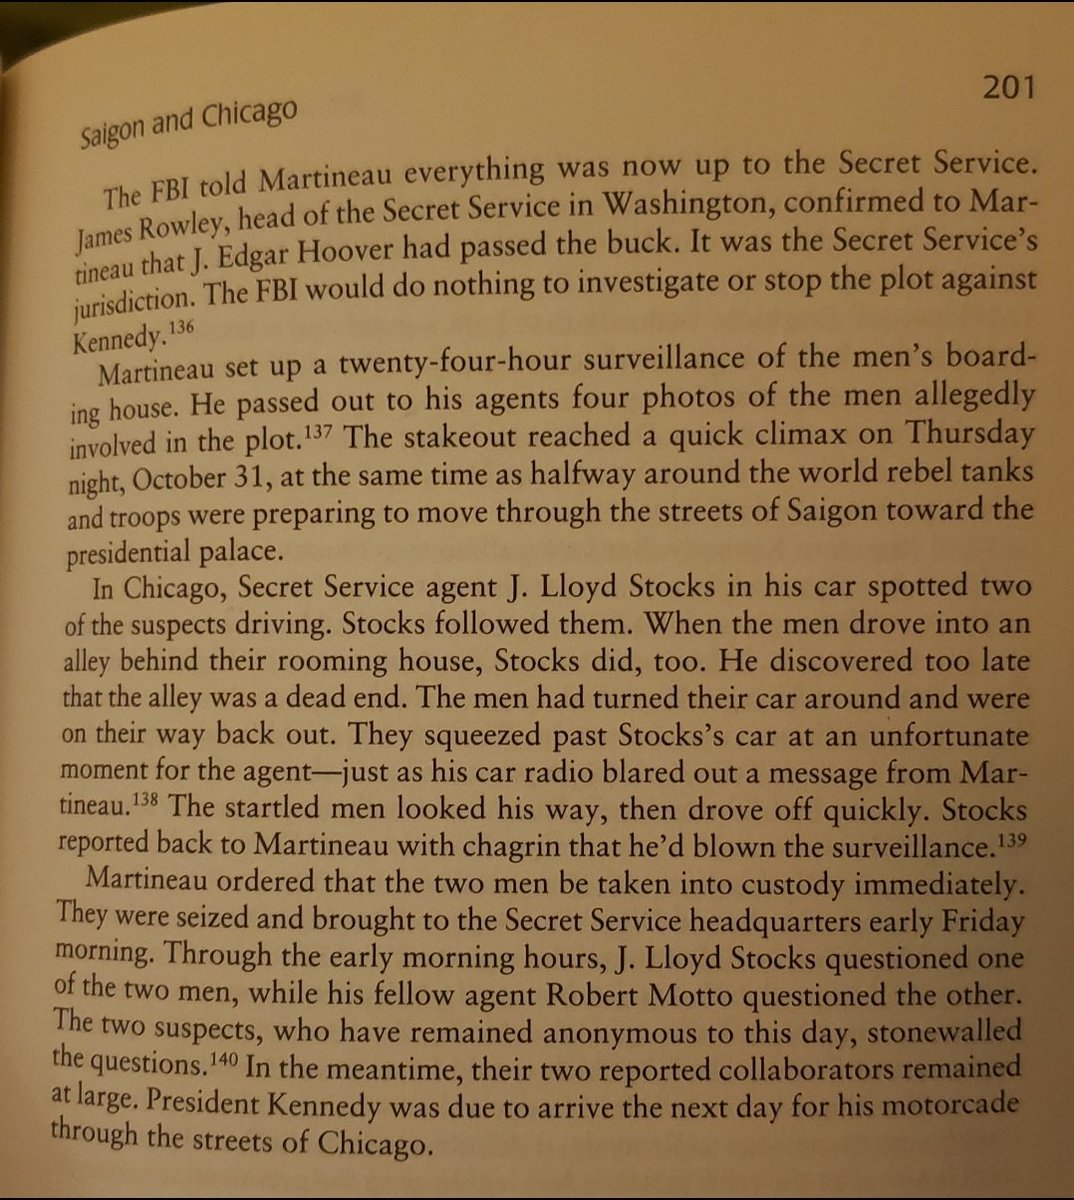 This is the part of the book that blew my mind...The Chicago plot - Kennedy was supposed to be assassinated in Chicago, as his motorcade made it's way to an Army-Air Force football game. An informant,"Lee," called the Secret Service and tipped them off to the plot.